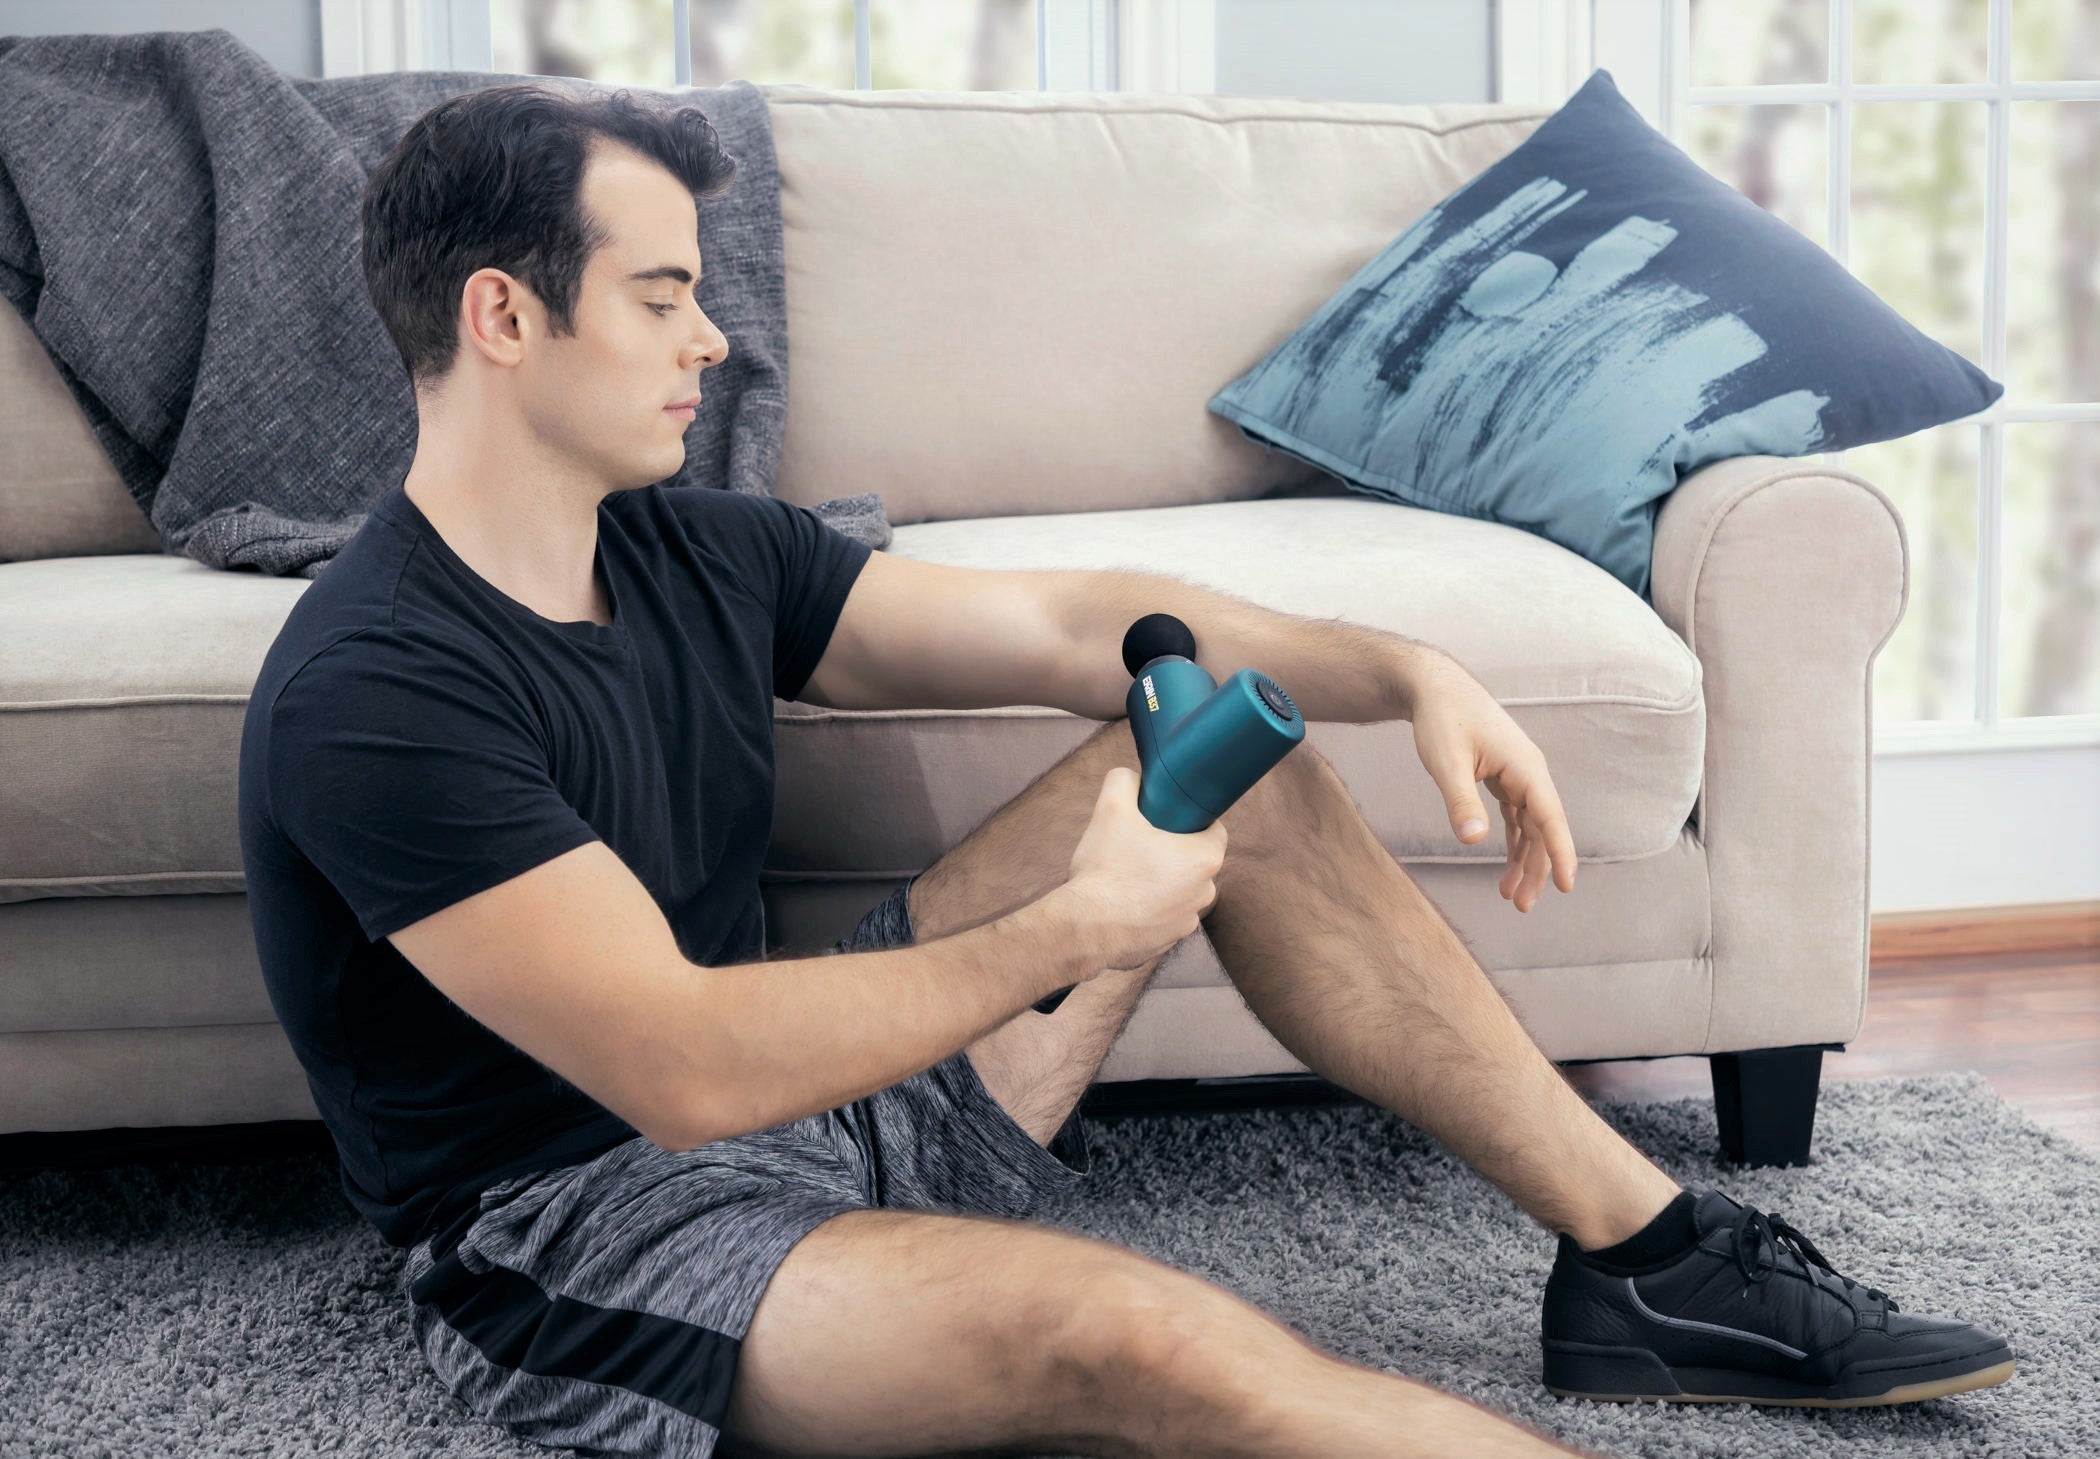 Young man in black t-shirt using a massage gun in a living room